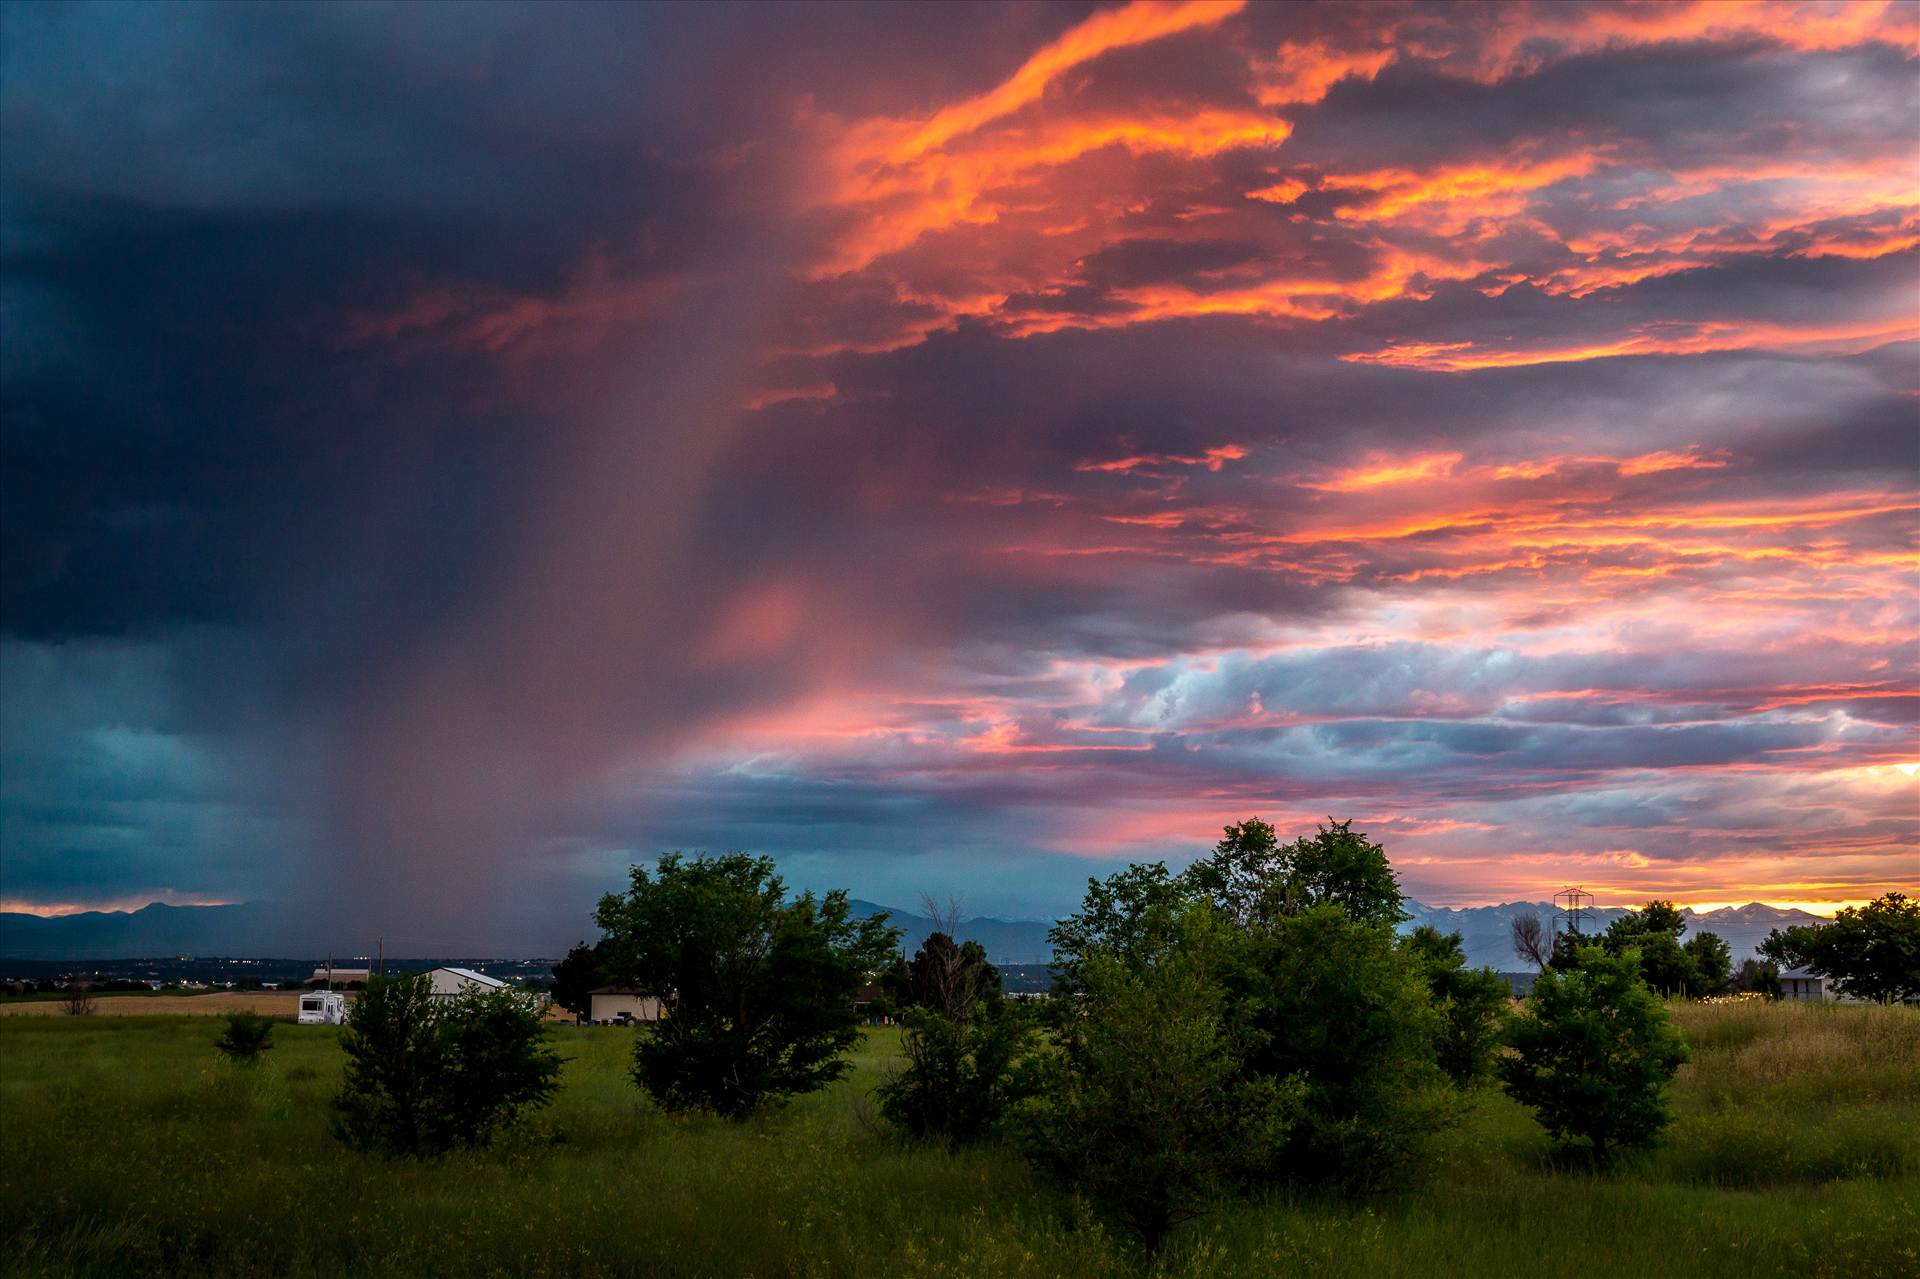 Sunset Storm - A storm rolls in just as the sun sets, highlighting the clouds with beautiful colors. by Scott Smith Photos